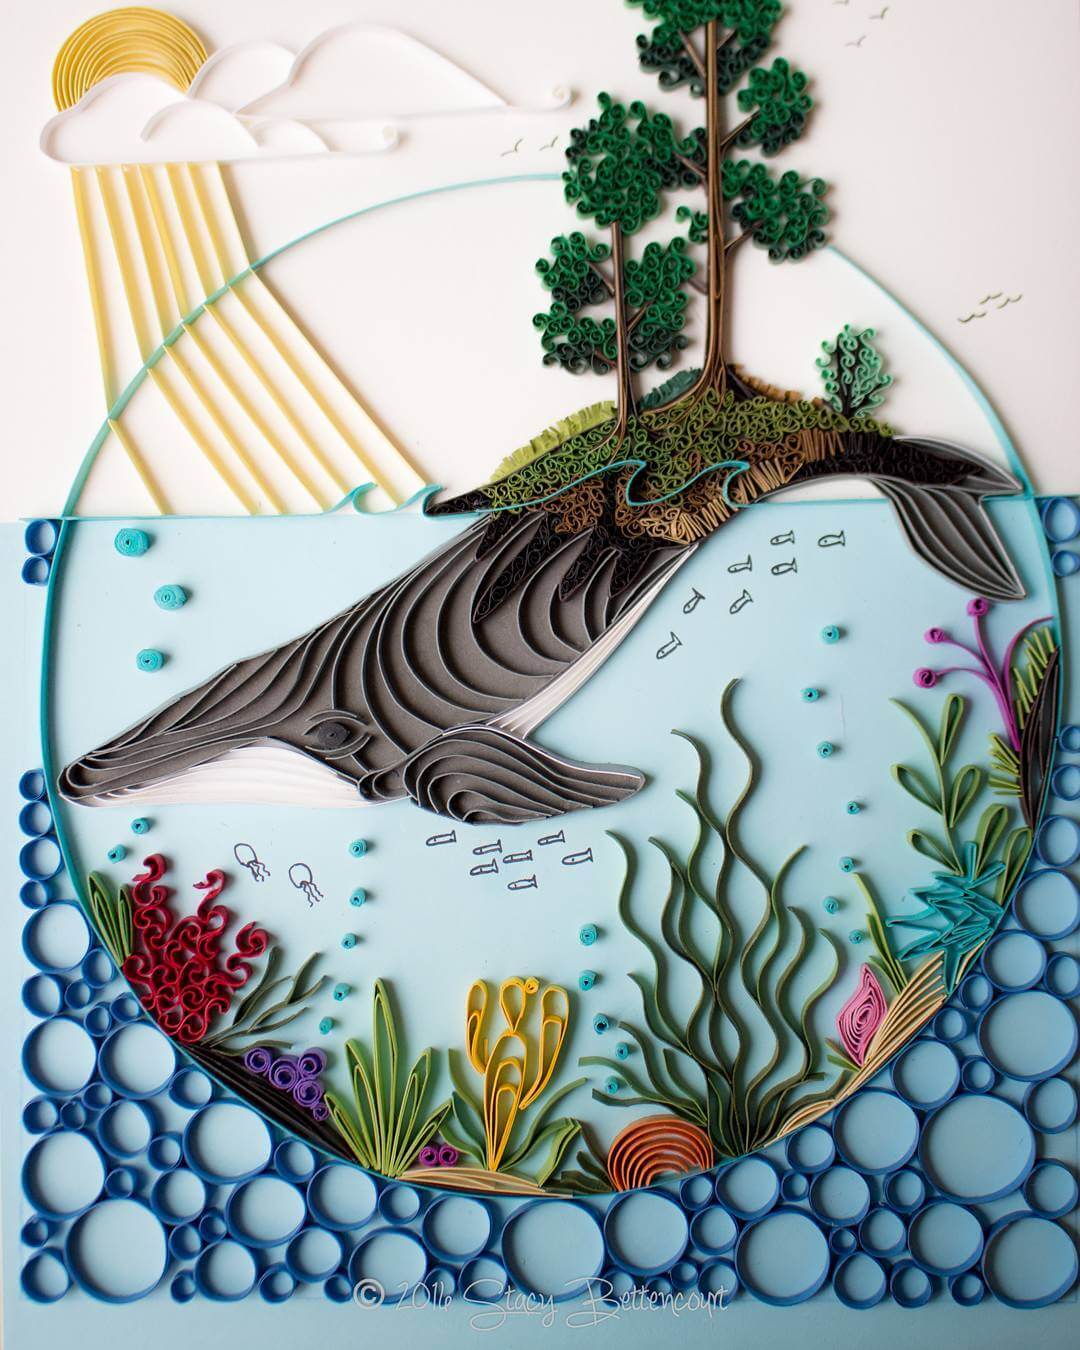 06-Surreal-Whale-Island-Stacy-Bettencourt-Quilling-Animals-and-Game-of-Thrones-www-designstack-co